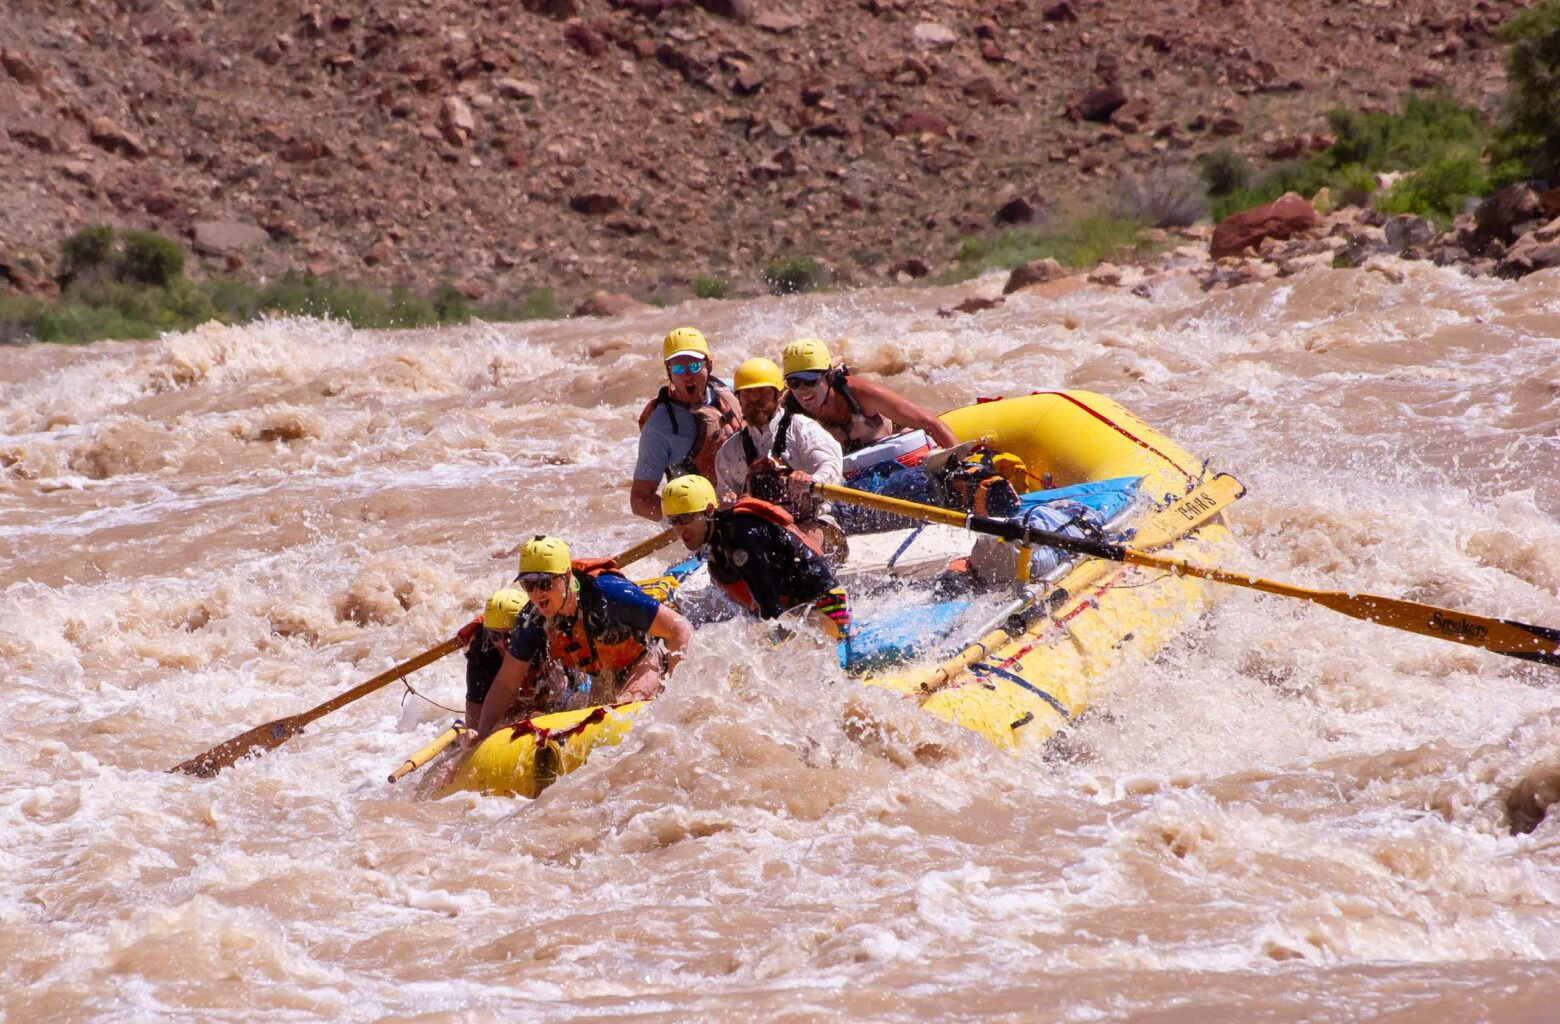 A group of people rafting through the Cataract River in Utah.